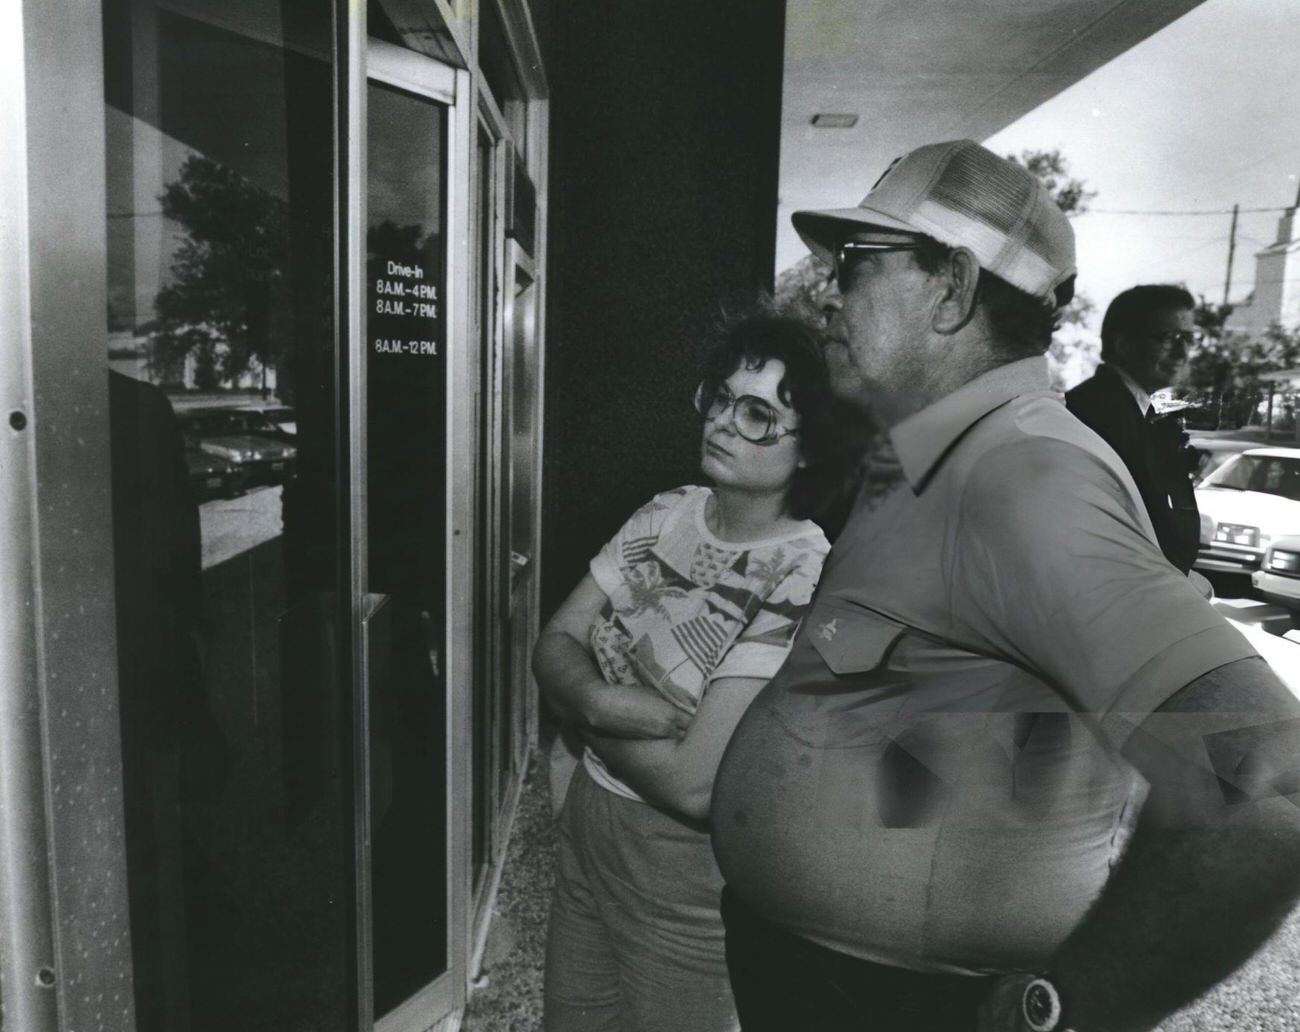 Ruby Peek and Carlos Vivo read the insolvency notice on the door of Katy National Bank, Houston, 1980s